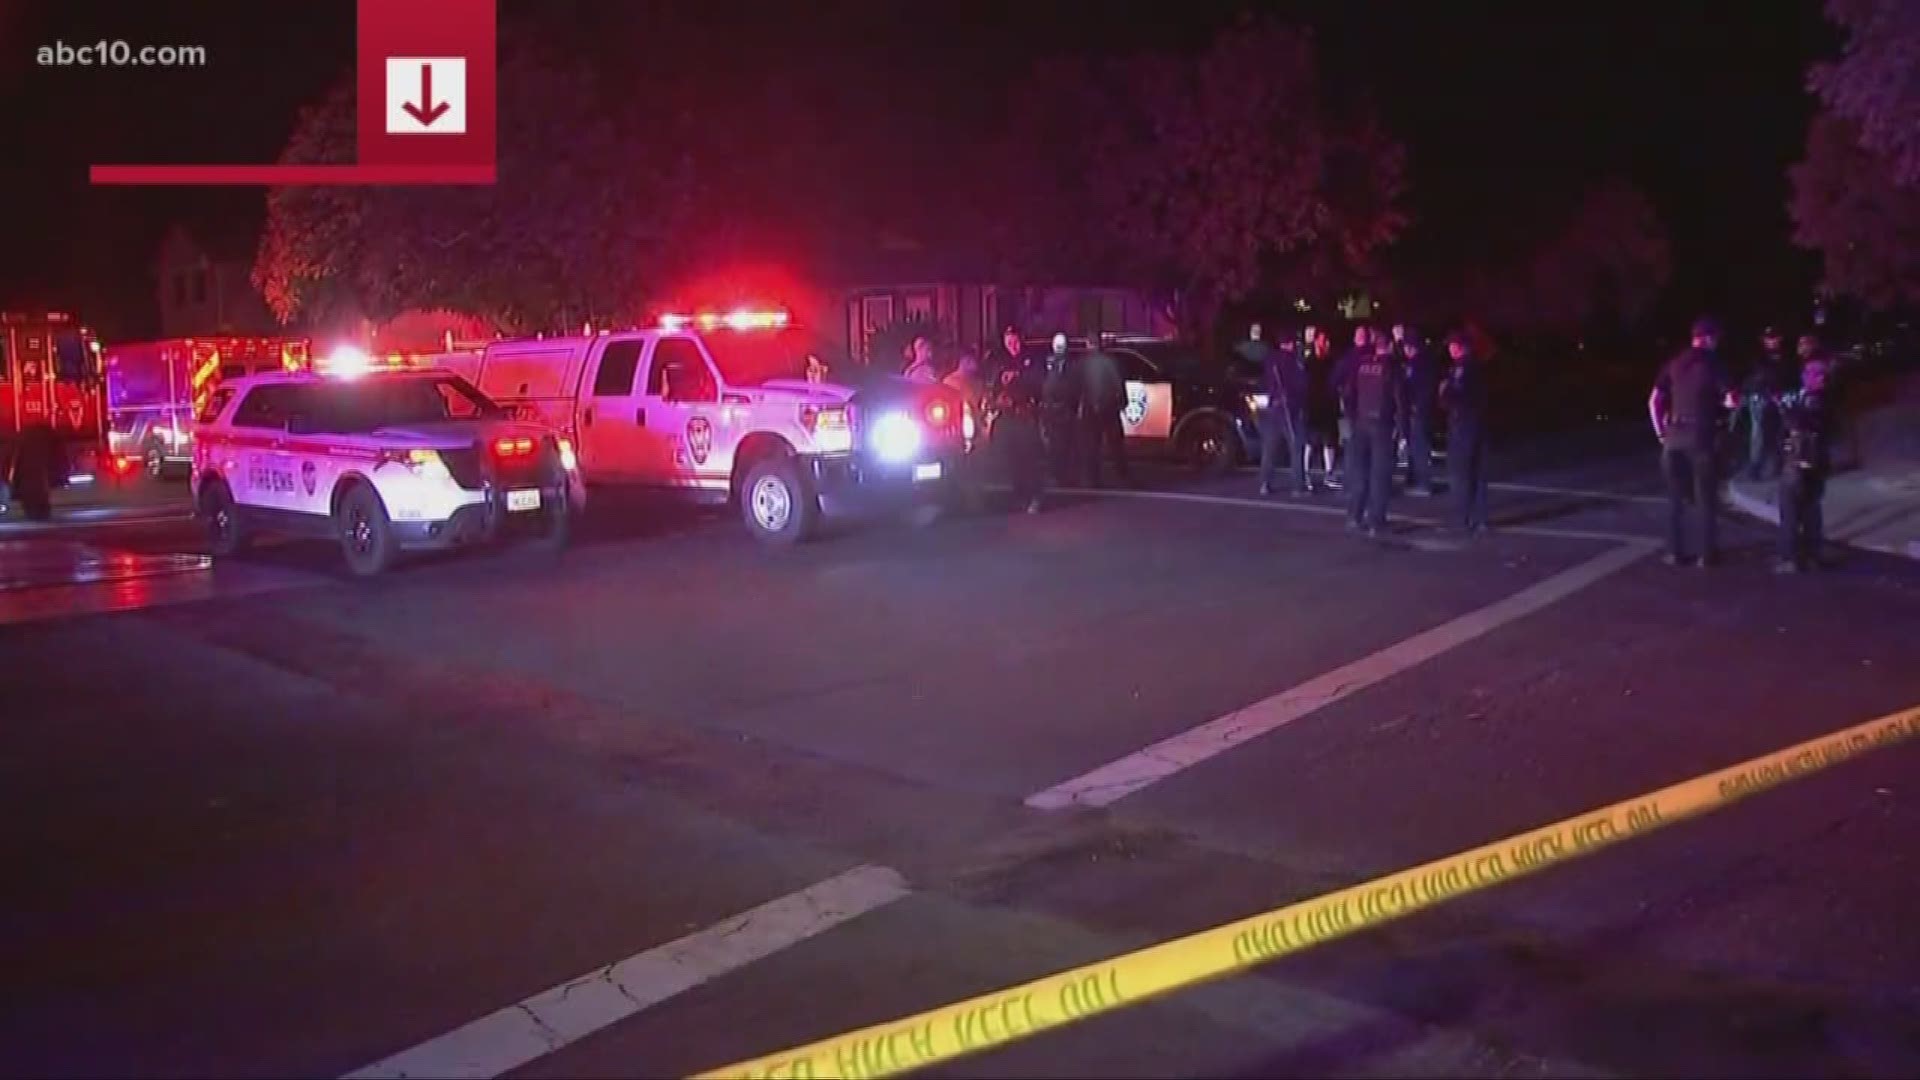 Antioch police officer shot in the head; suspect sought (November 5, 2018)